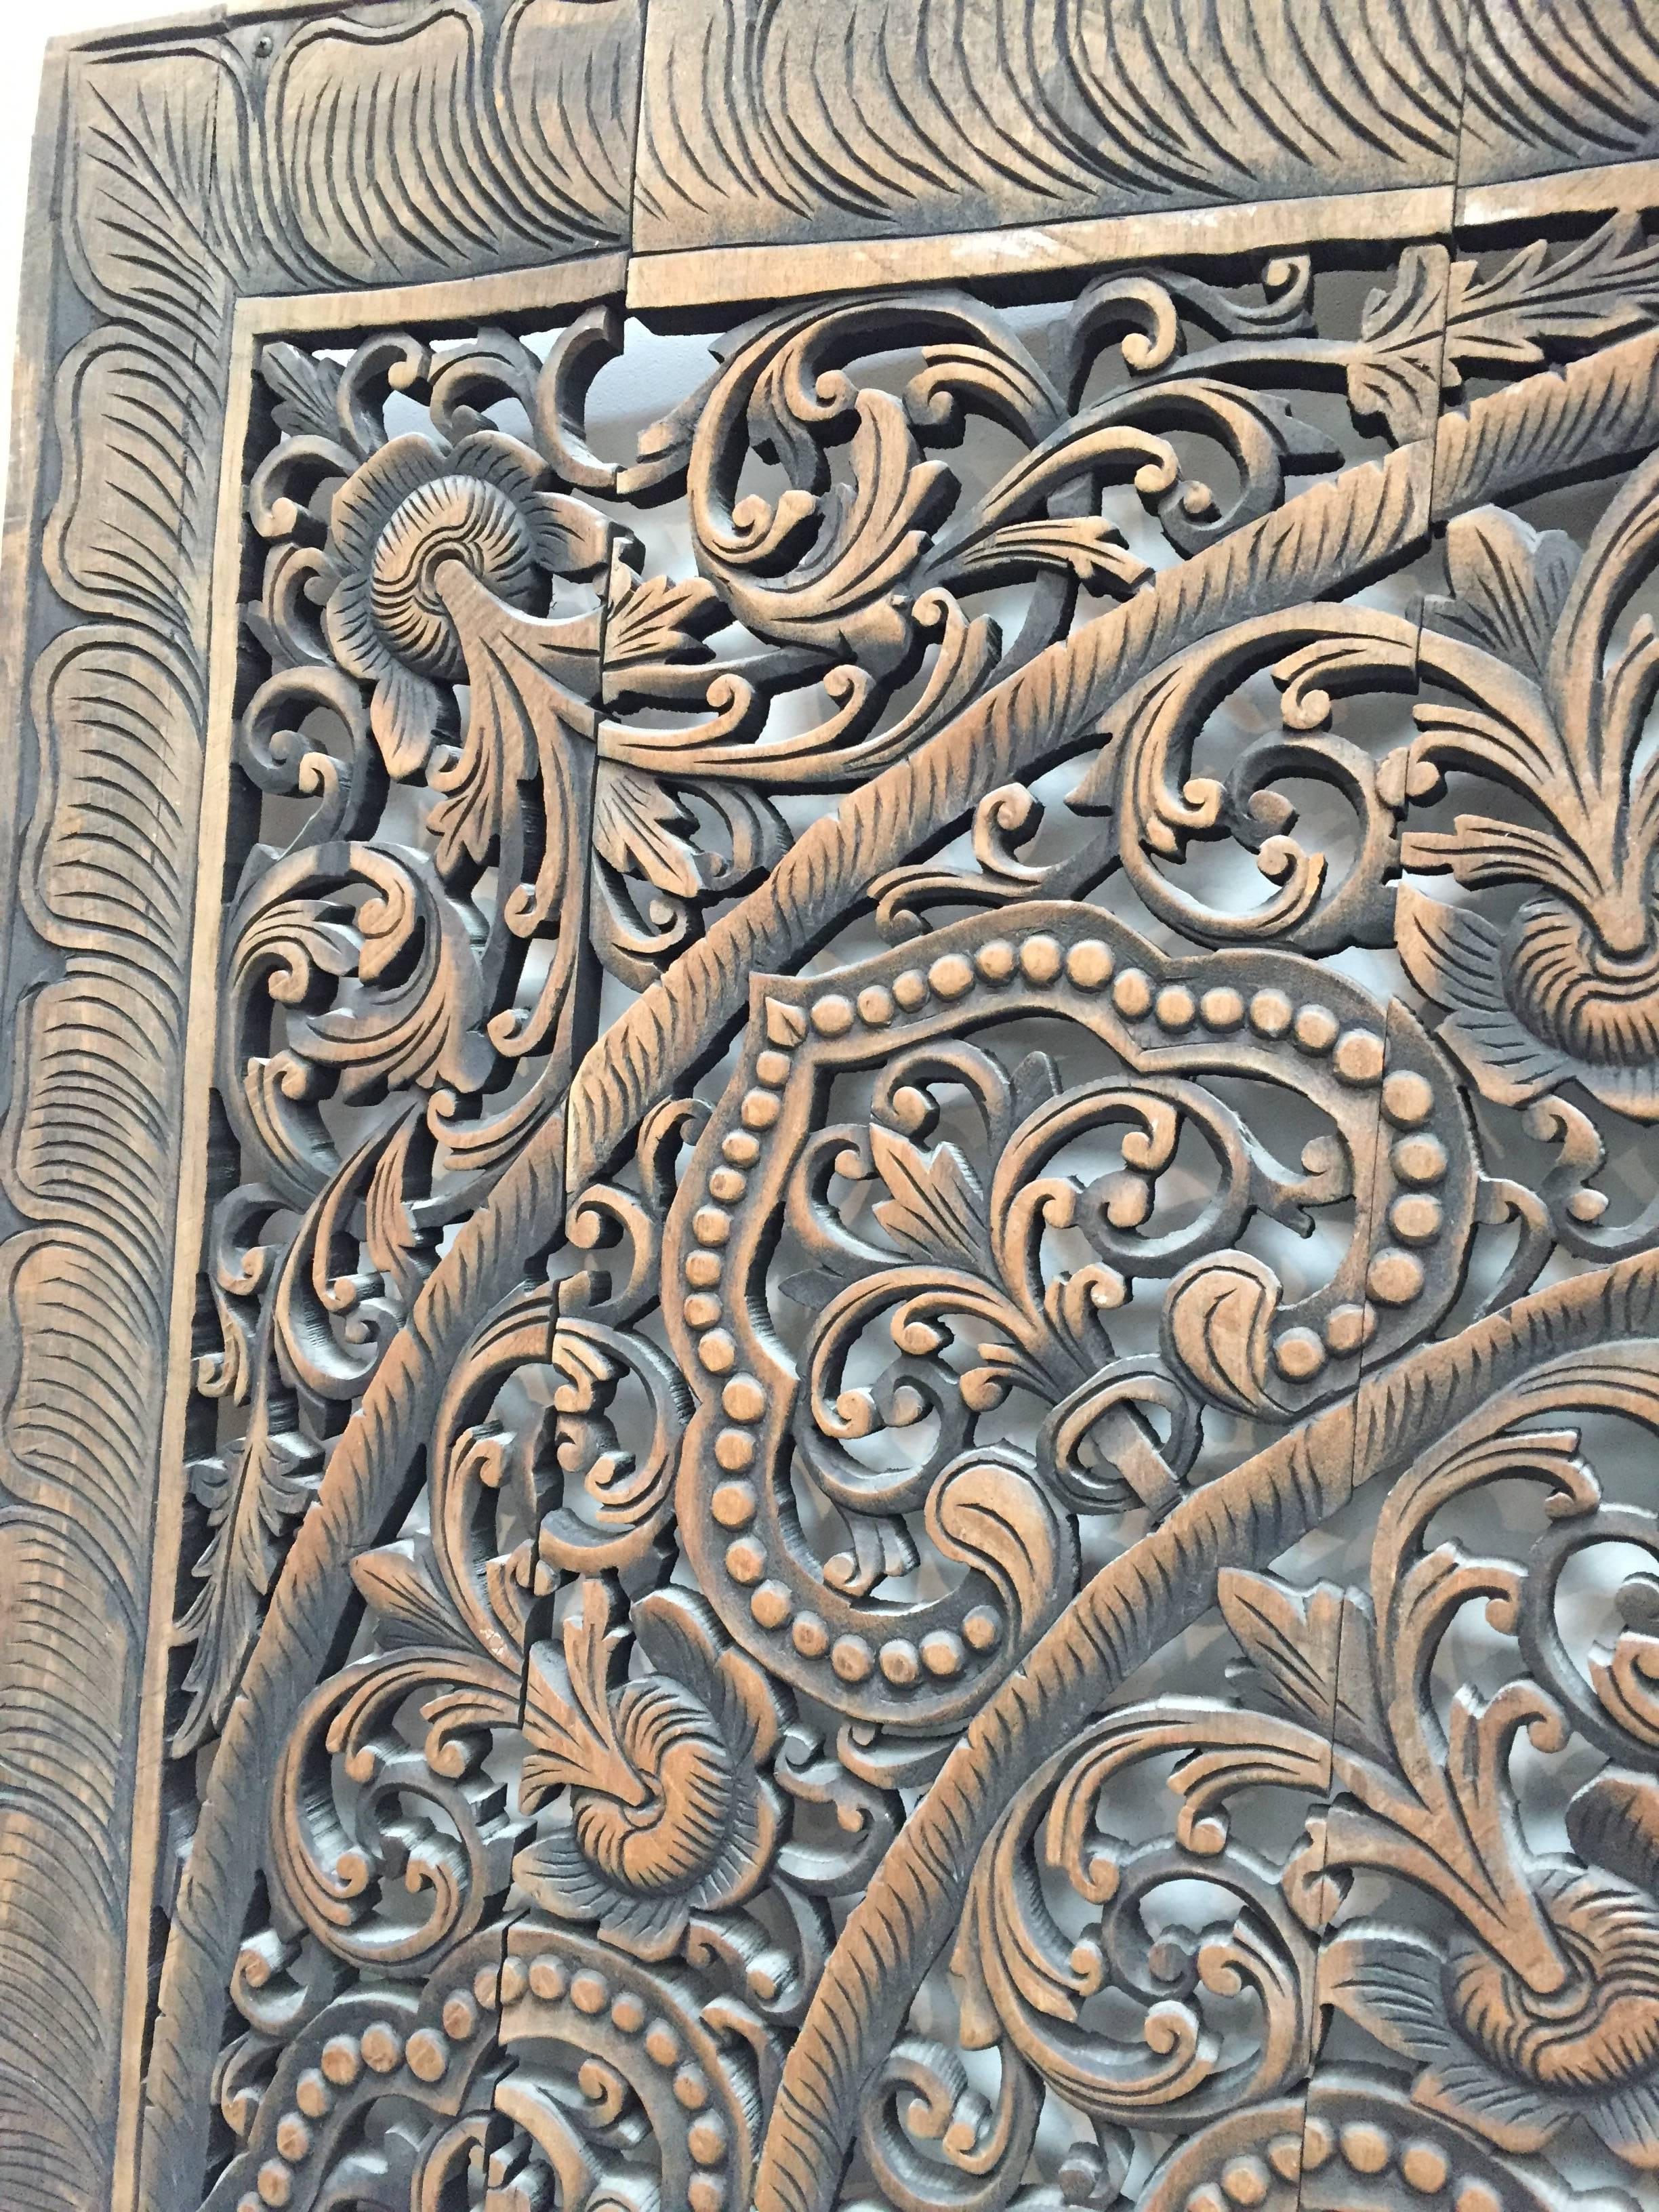 Hand-Carved Balinese Oversized Decorative Teak Wall or Ceiling Art Panel 1